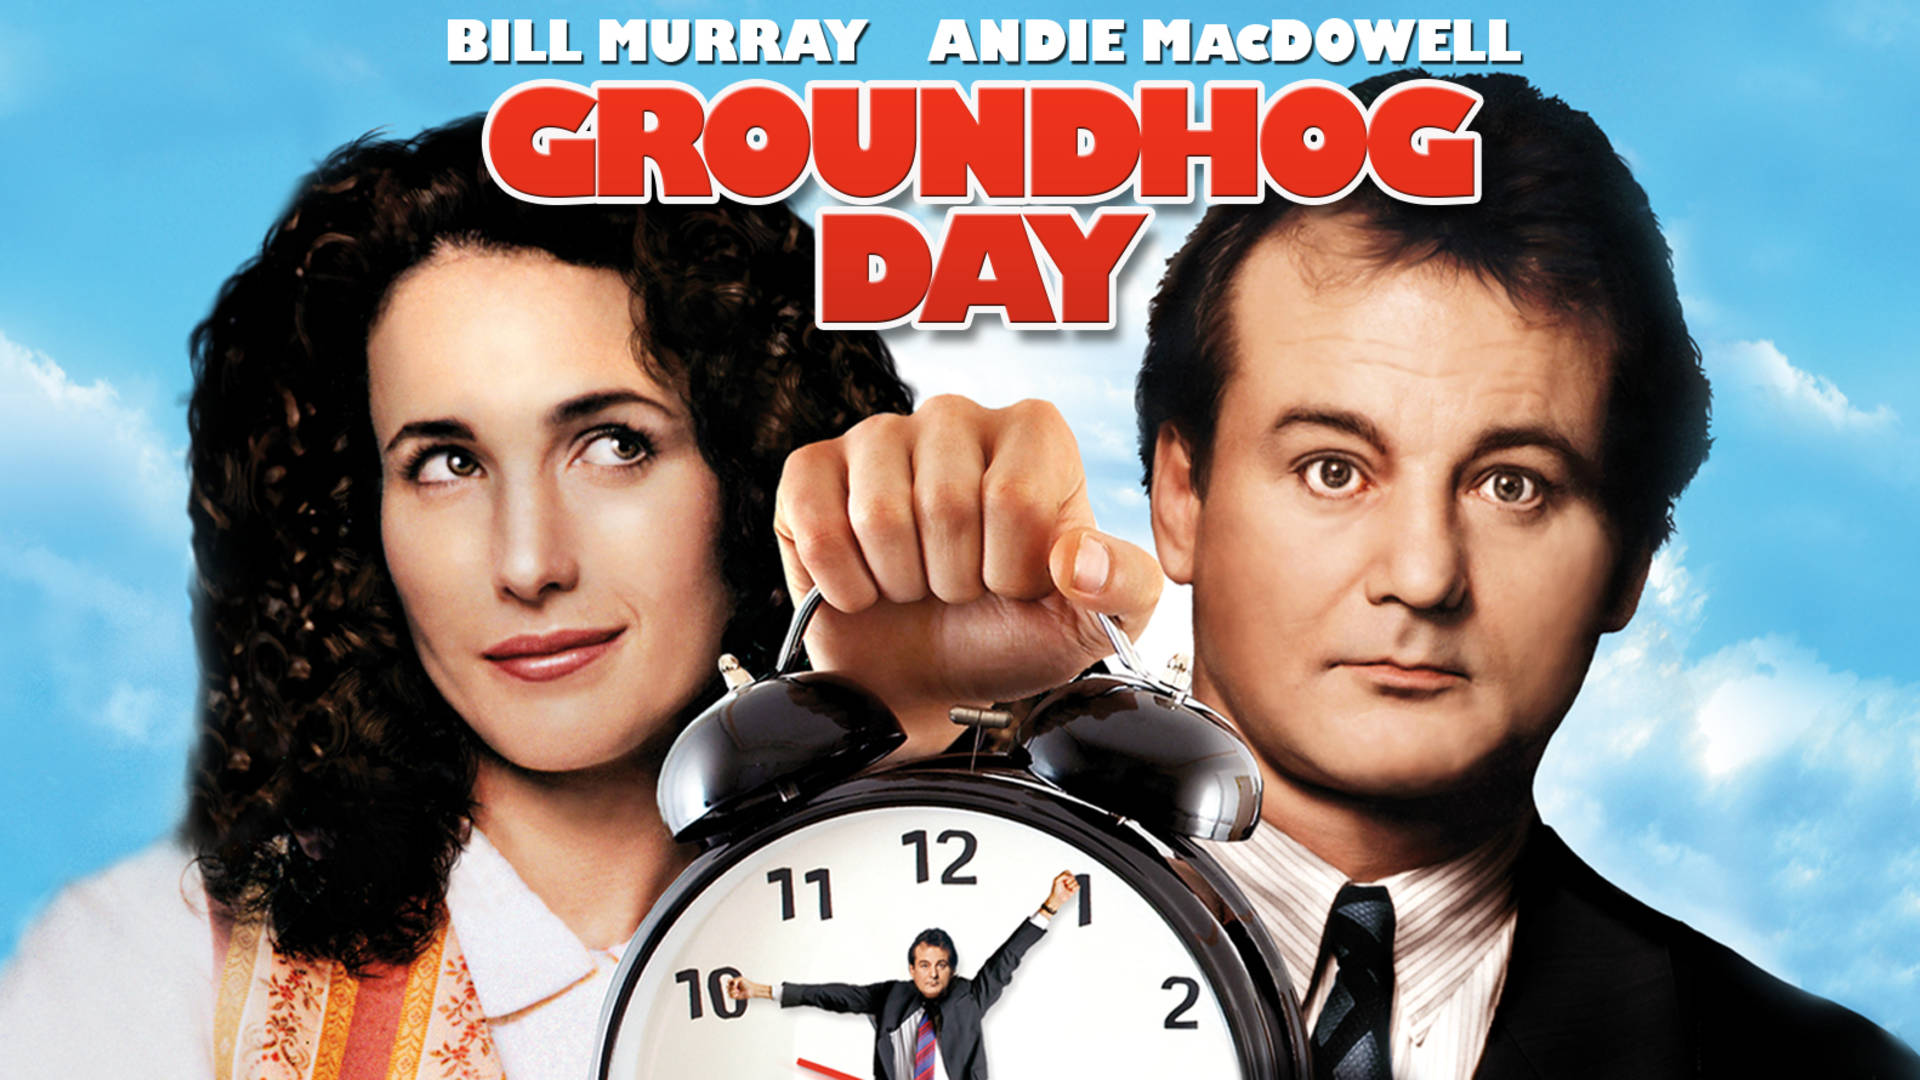 Title art for the time travel movie Groundhog Day